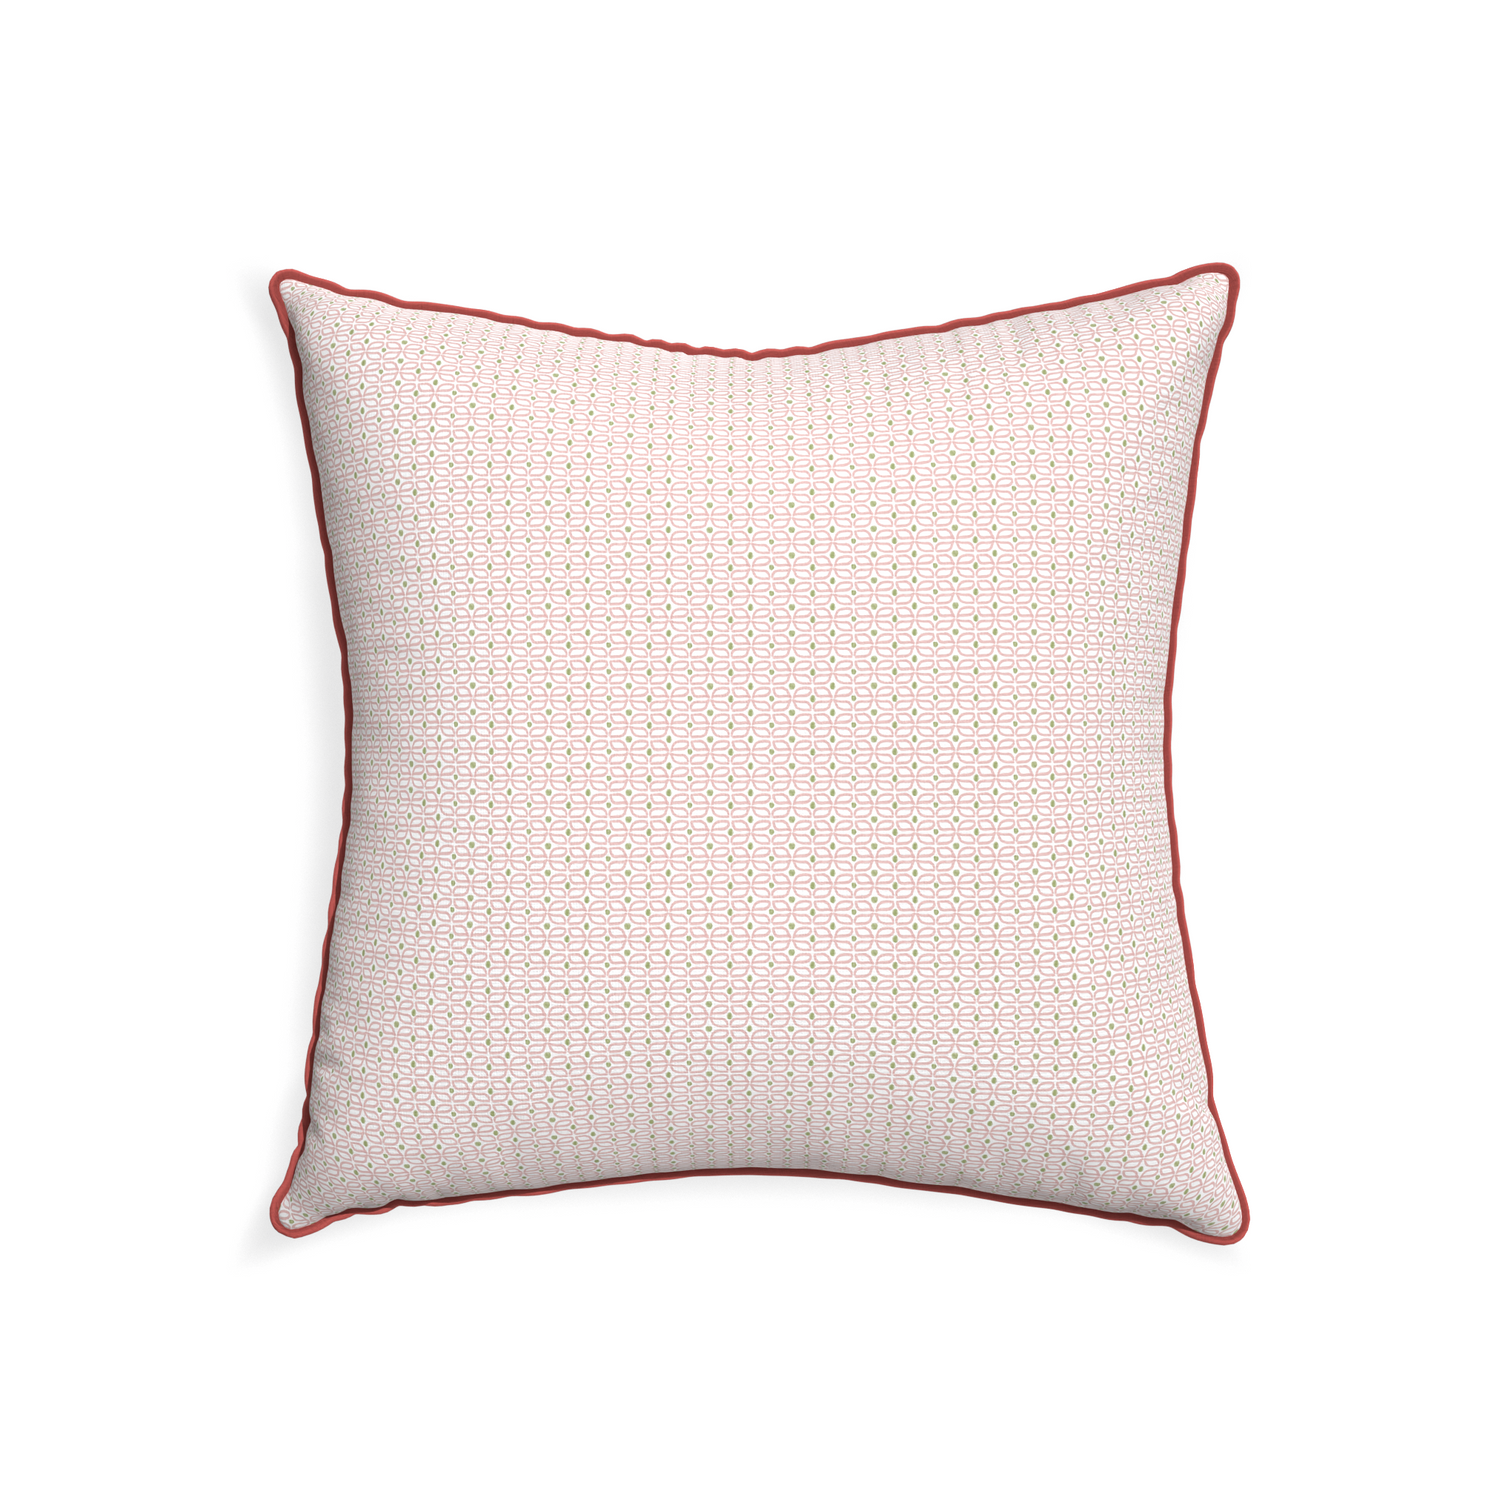 22-square loomi pink custom pink geometricpillow with c piping on white background